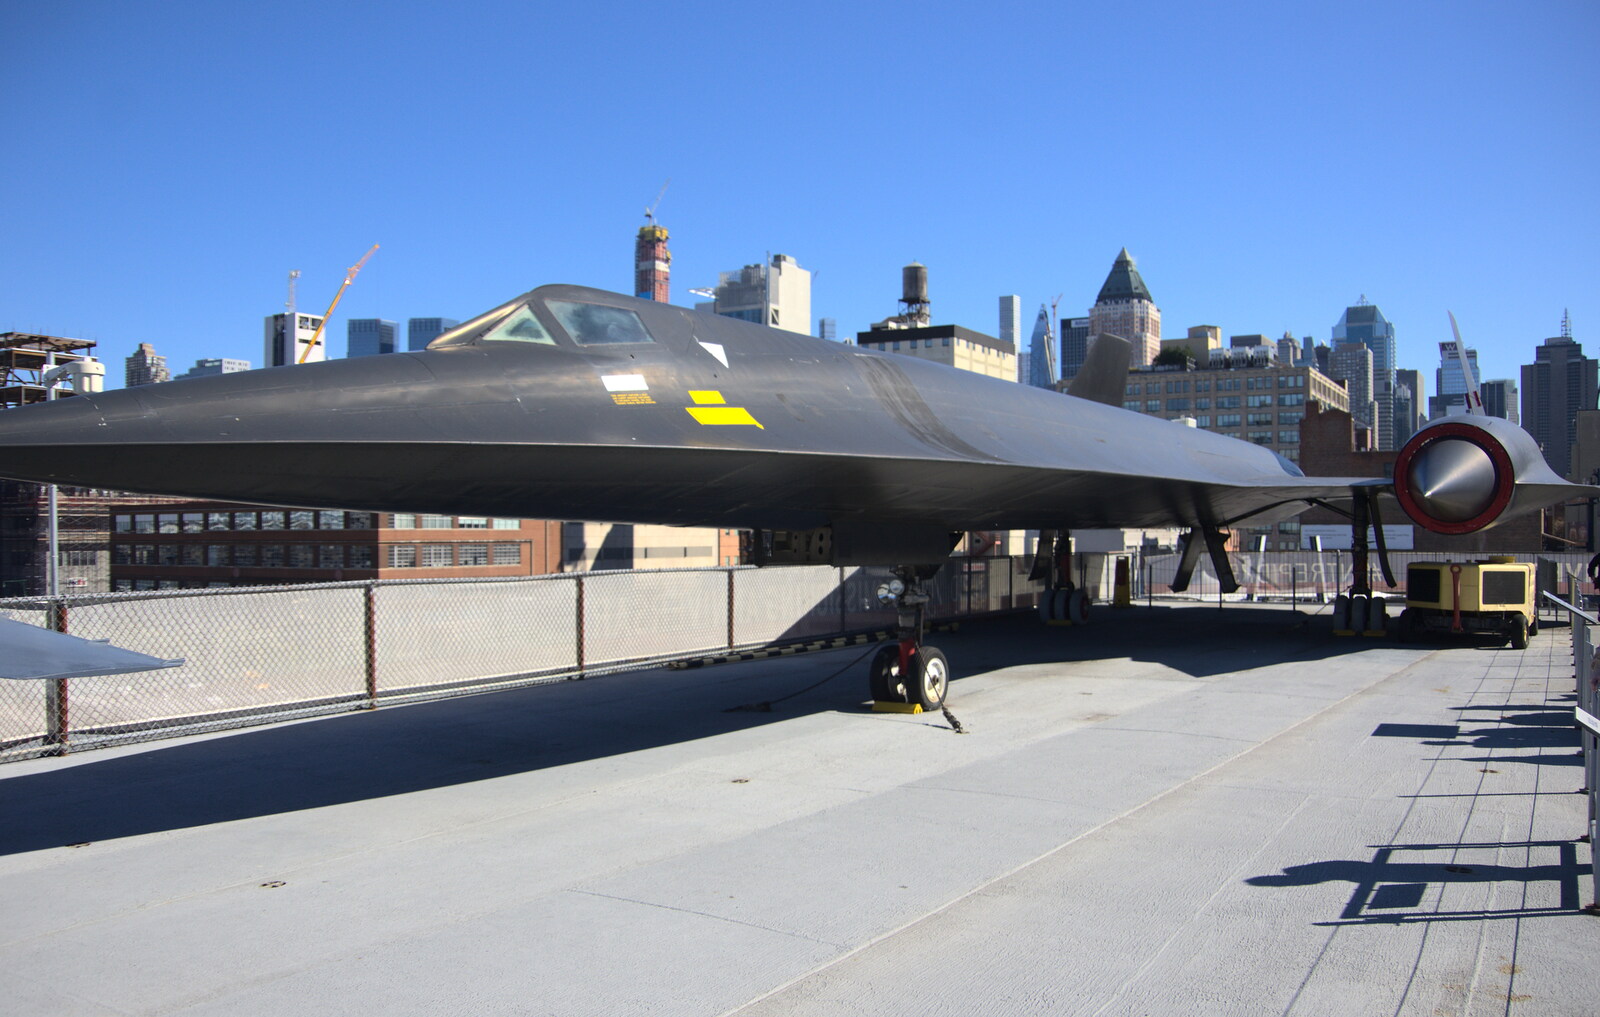 A Lockheed A-12 - the prototype SR-71 'Blackbird' from Times Square, USS Intrepid and the High Line, Manhattan, New York - 25th October 2018